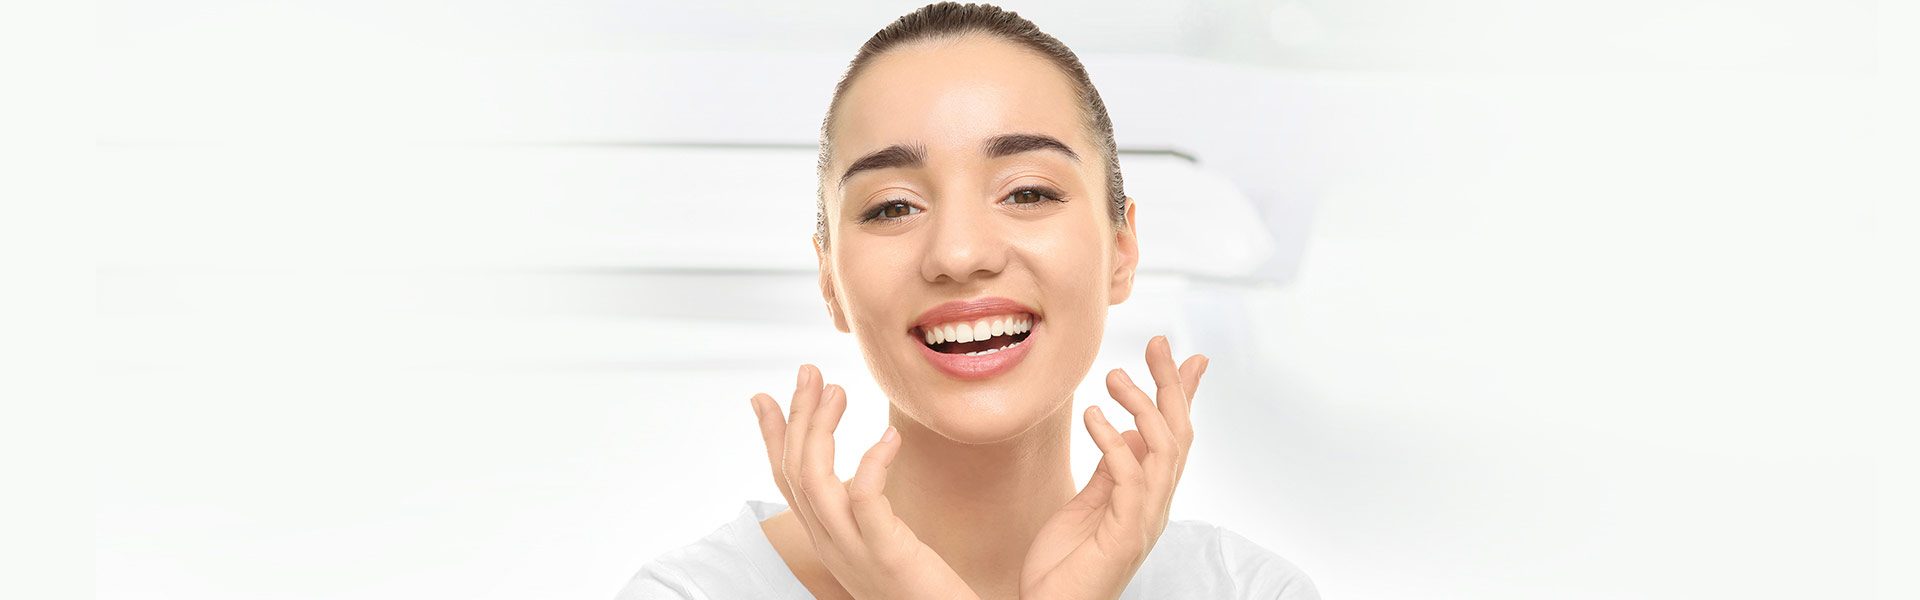 What to Look For In a Cosmetic Dentist?